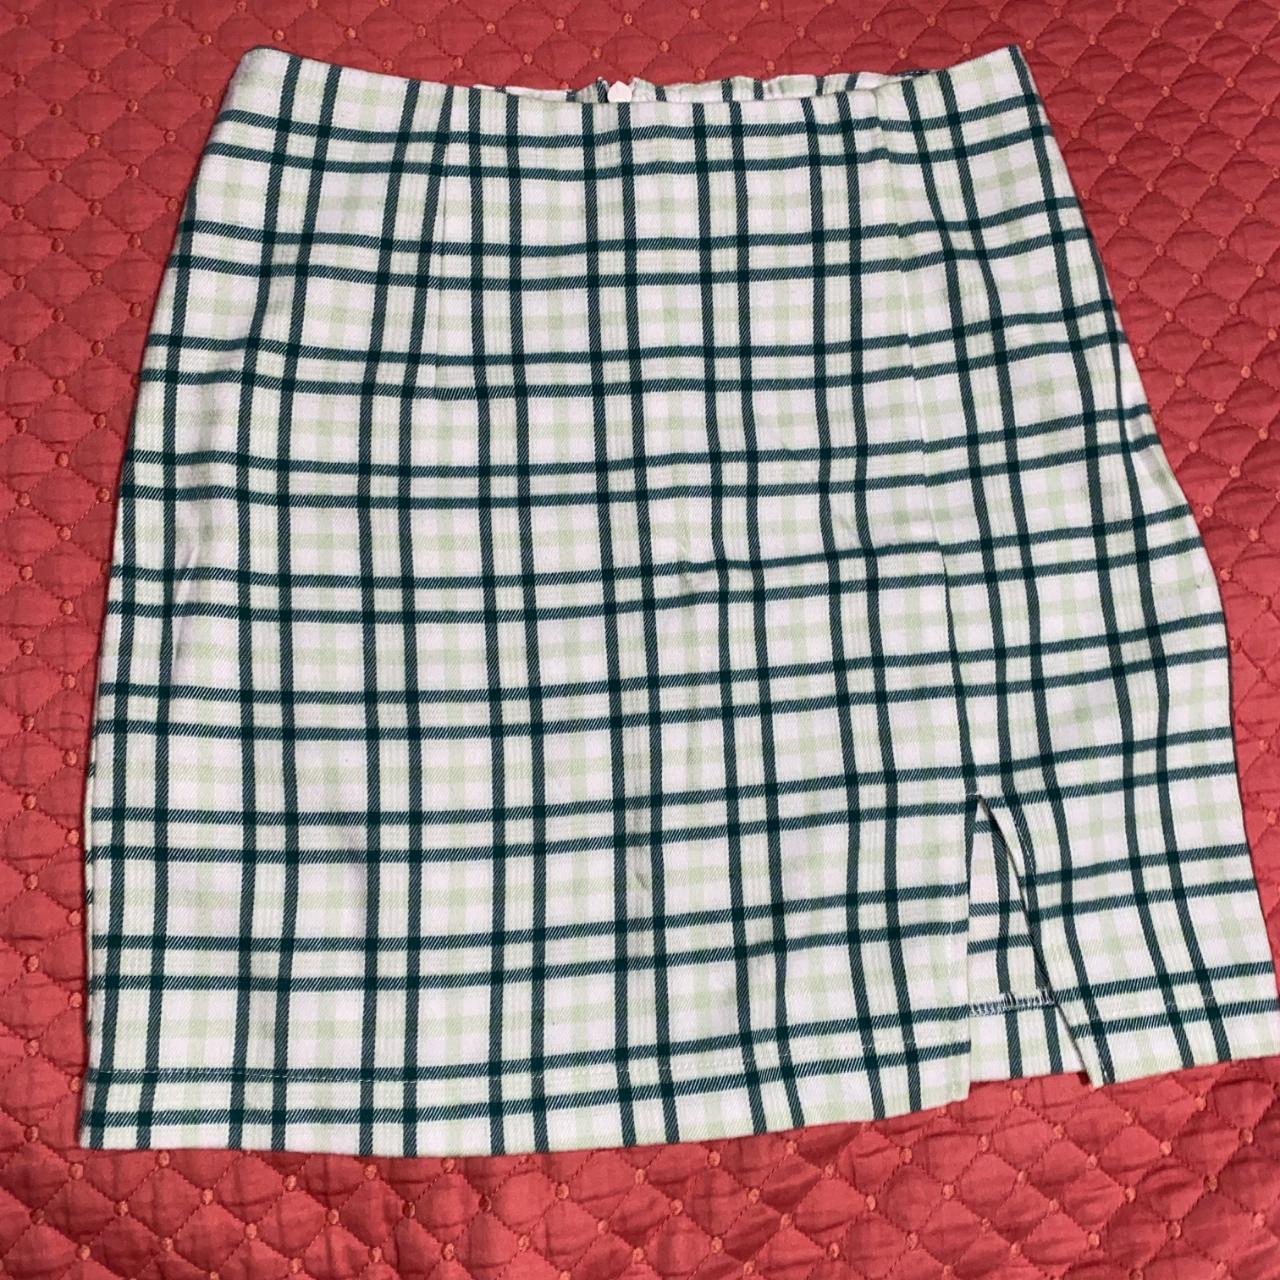 Wild Fable tight green plaid mini skirt with slit at... - Depop